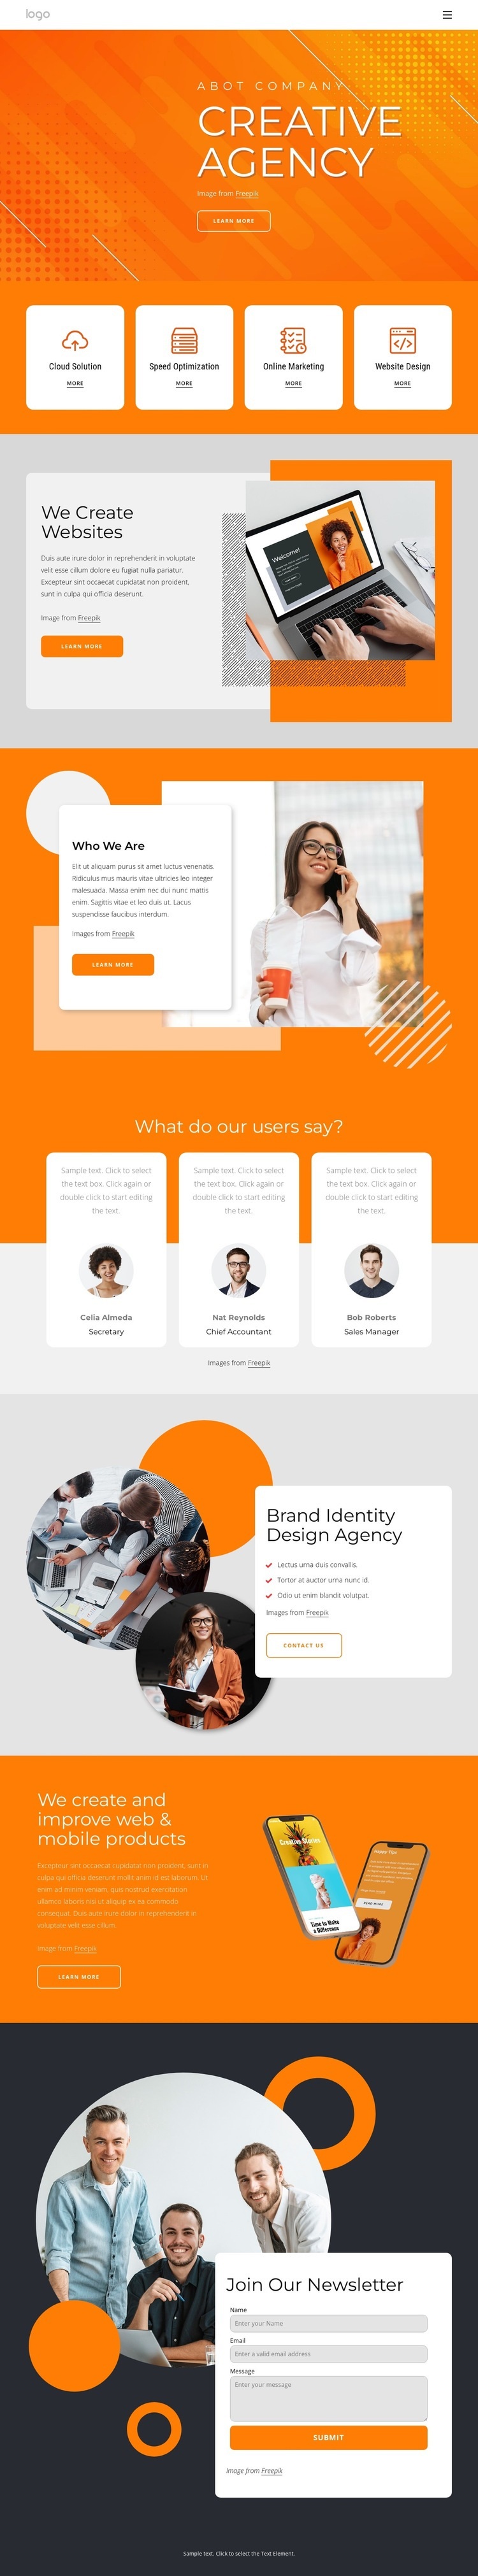 The creative agency for your next big thing Webflow Template Alternative